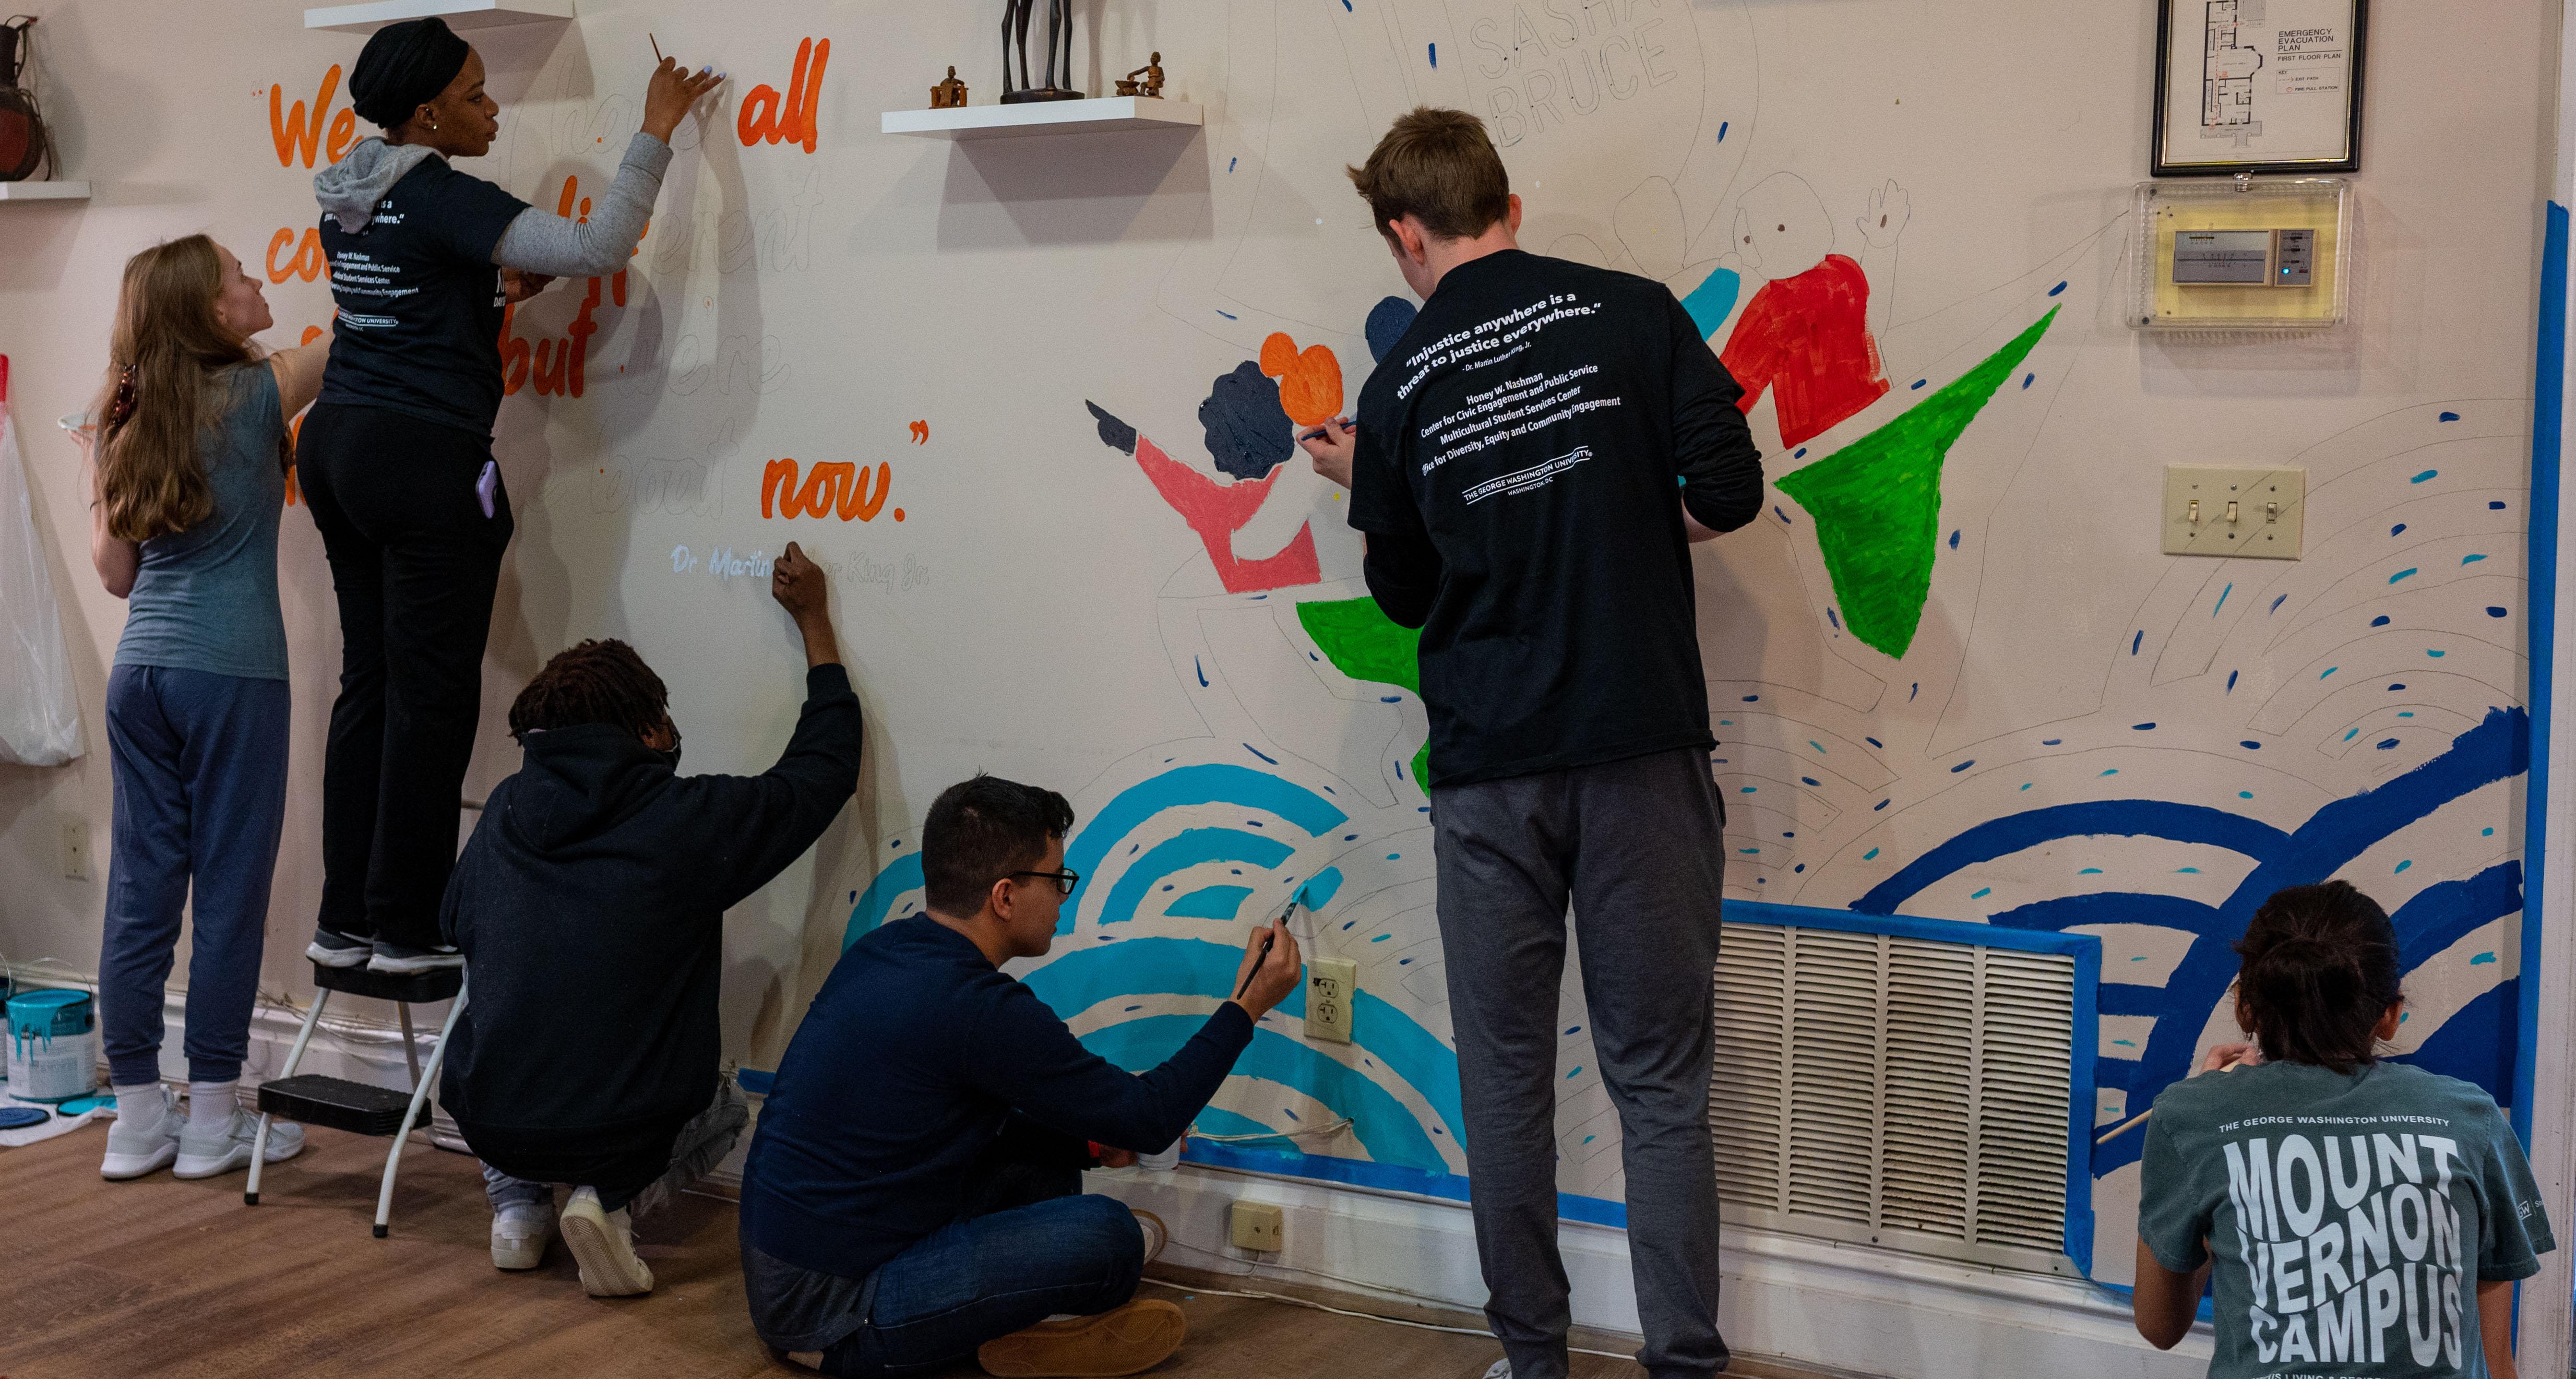 Students assisting with painting a mural on a wall at a youth shelter on MLK Day of Service and Leadership